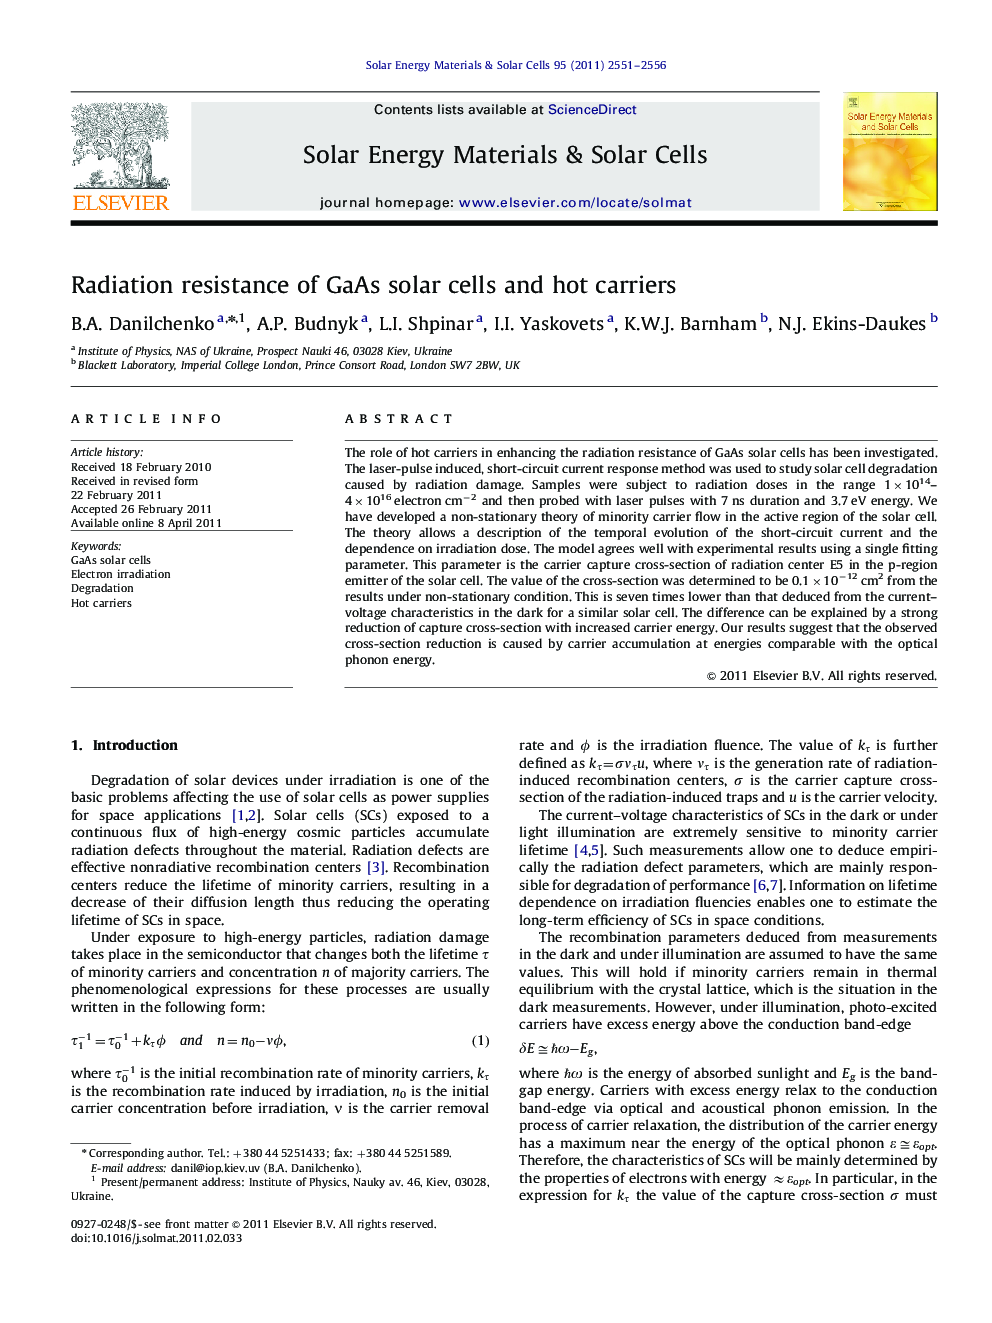 Radiation resistance of GaAs solar cells and hot carriers